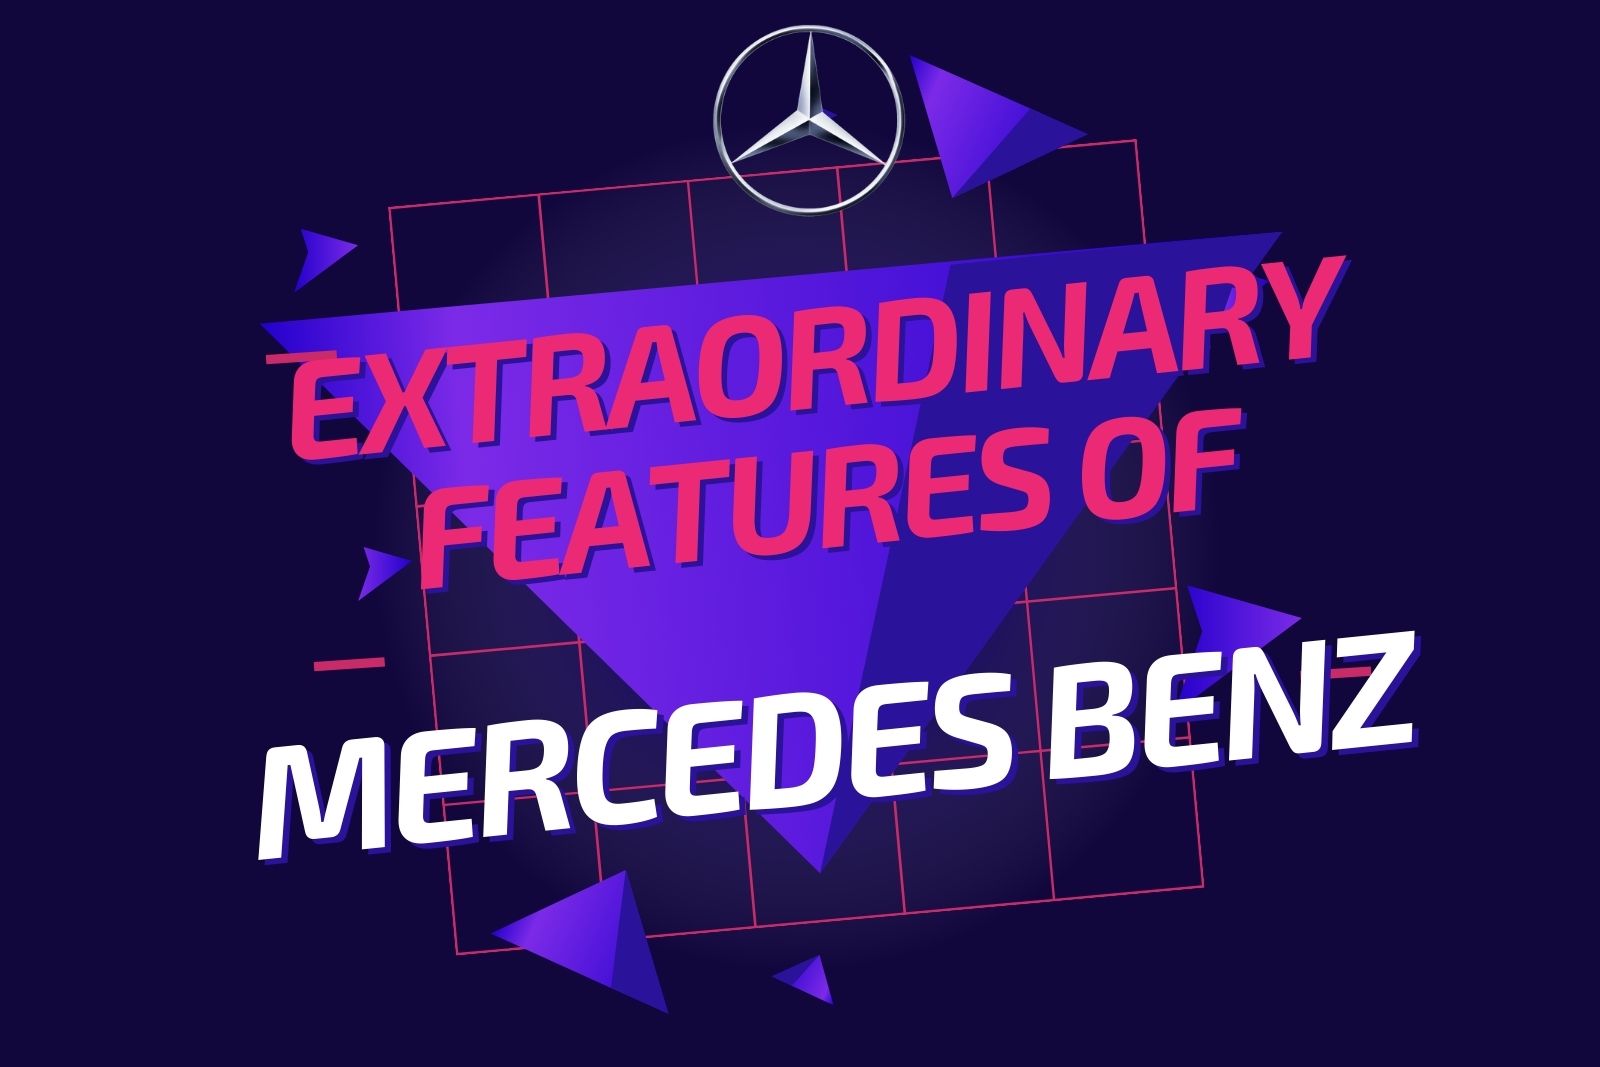 Do You Know Some Extraordinary Features Of Mercedes Benz?